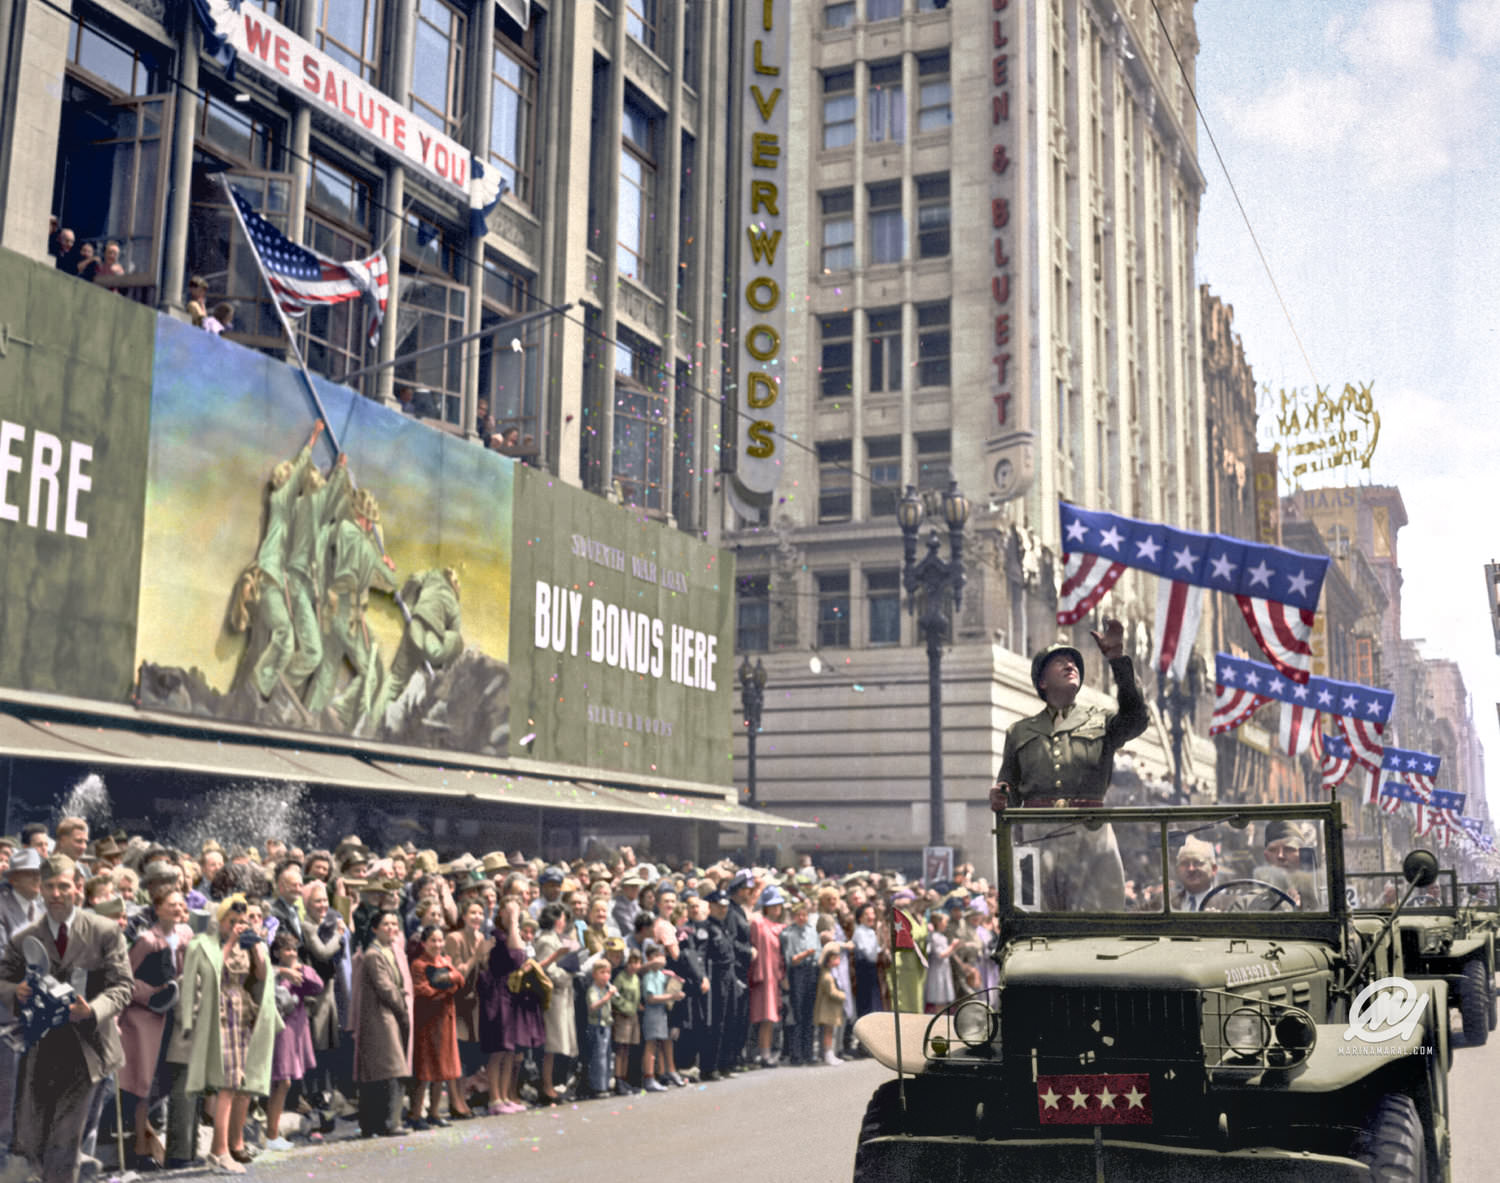 General George S. Patton acknowledging the cheers of the welcoming crowds in Los Angeles, CA, during his visit on June 9, 1945.